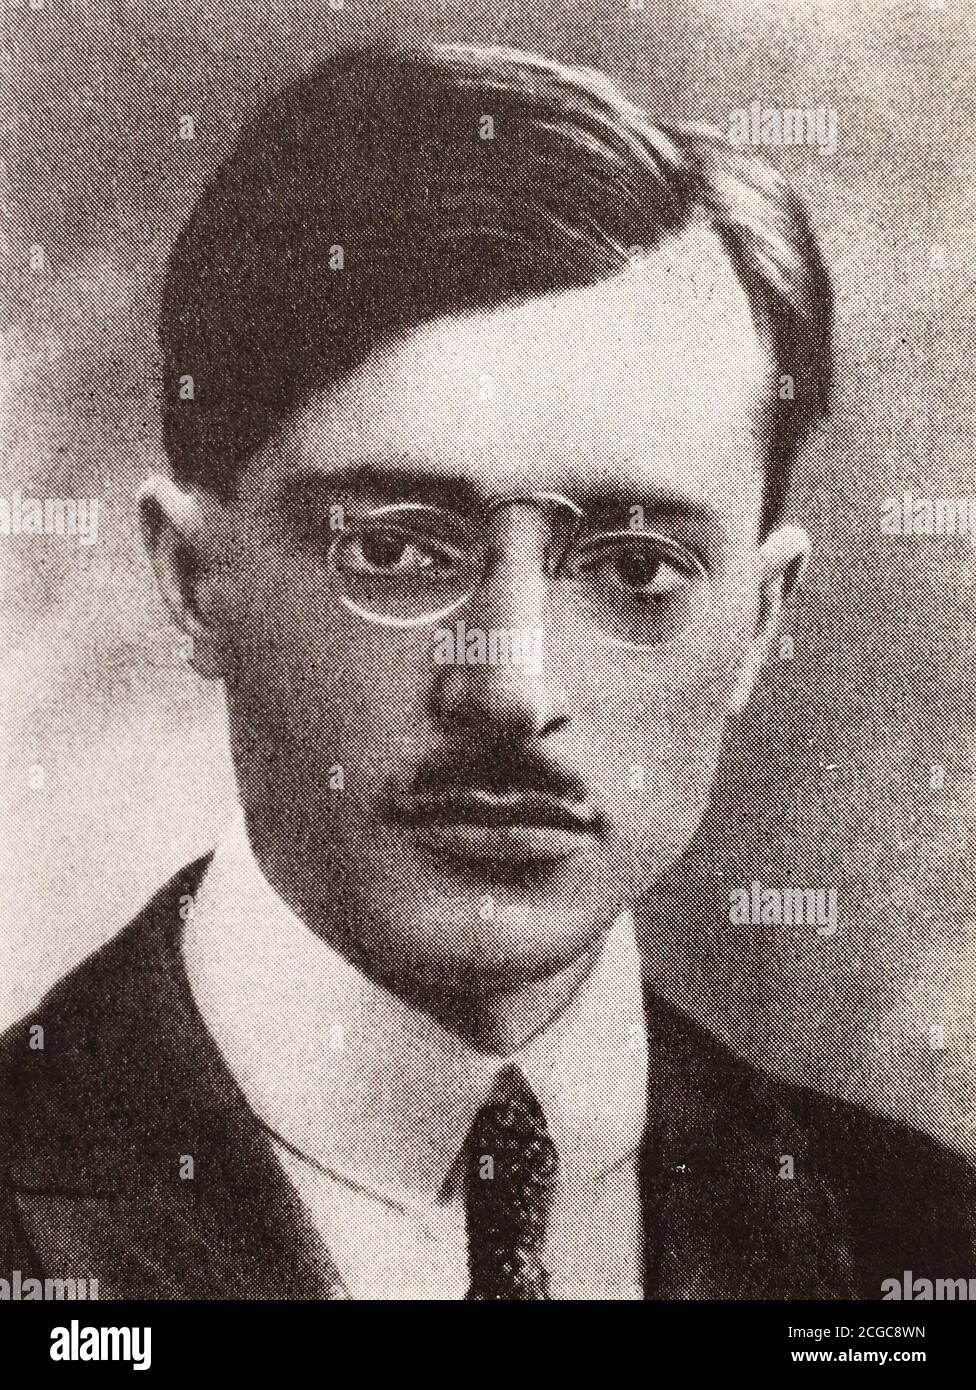 Palmiro Togliatti. Photo of 1920. Palmiro Togliatti was an Italian politician and leader of the Italian Communist Party from 1927 until his death. He was nicknamed Il Migliore ('The Best') by his supporters. In 1930 he became a citizen of the Soviet Union and later he had a city in that country named after him: Tolyatti. Stock Photo